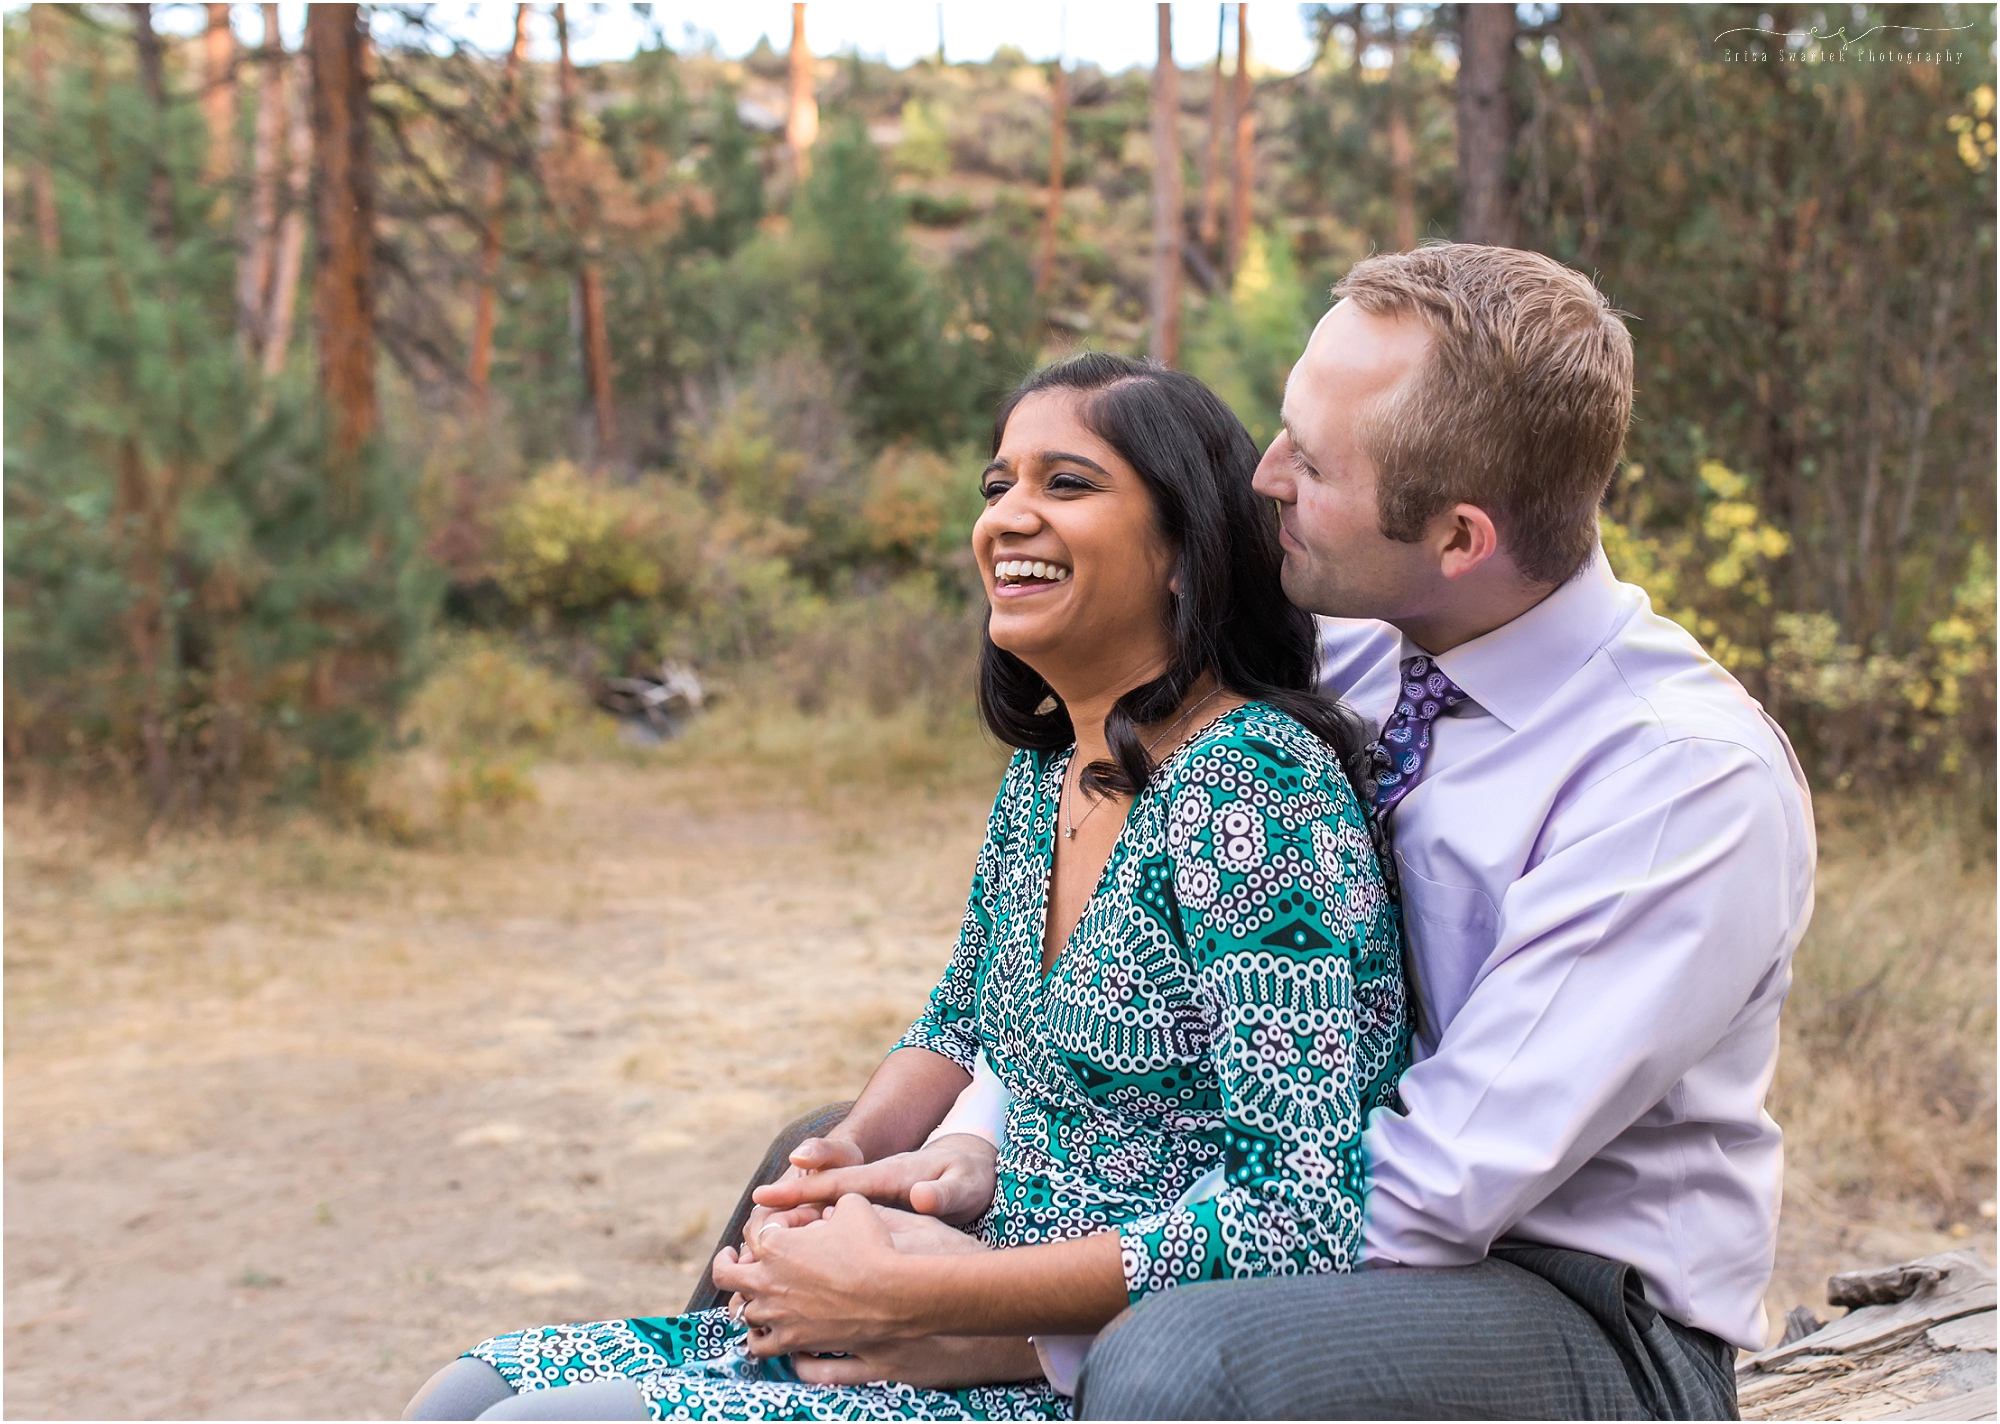 What do you think he whispered in her ear to get her to laugh like that at her Bend, OR engagement session? 